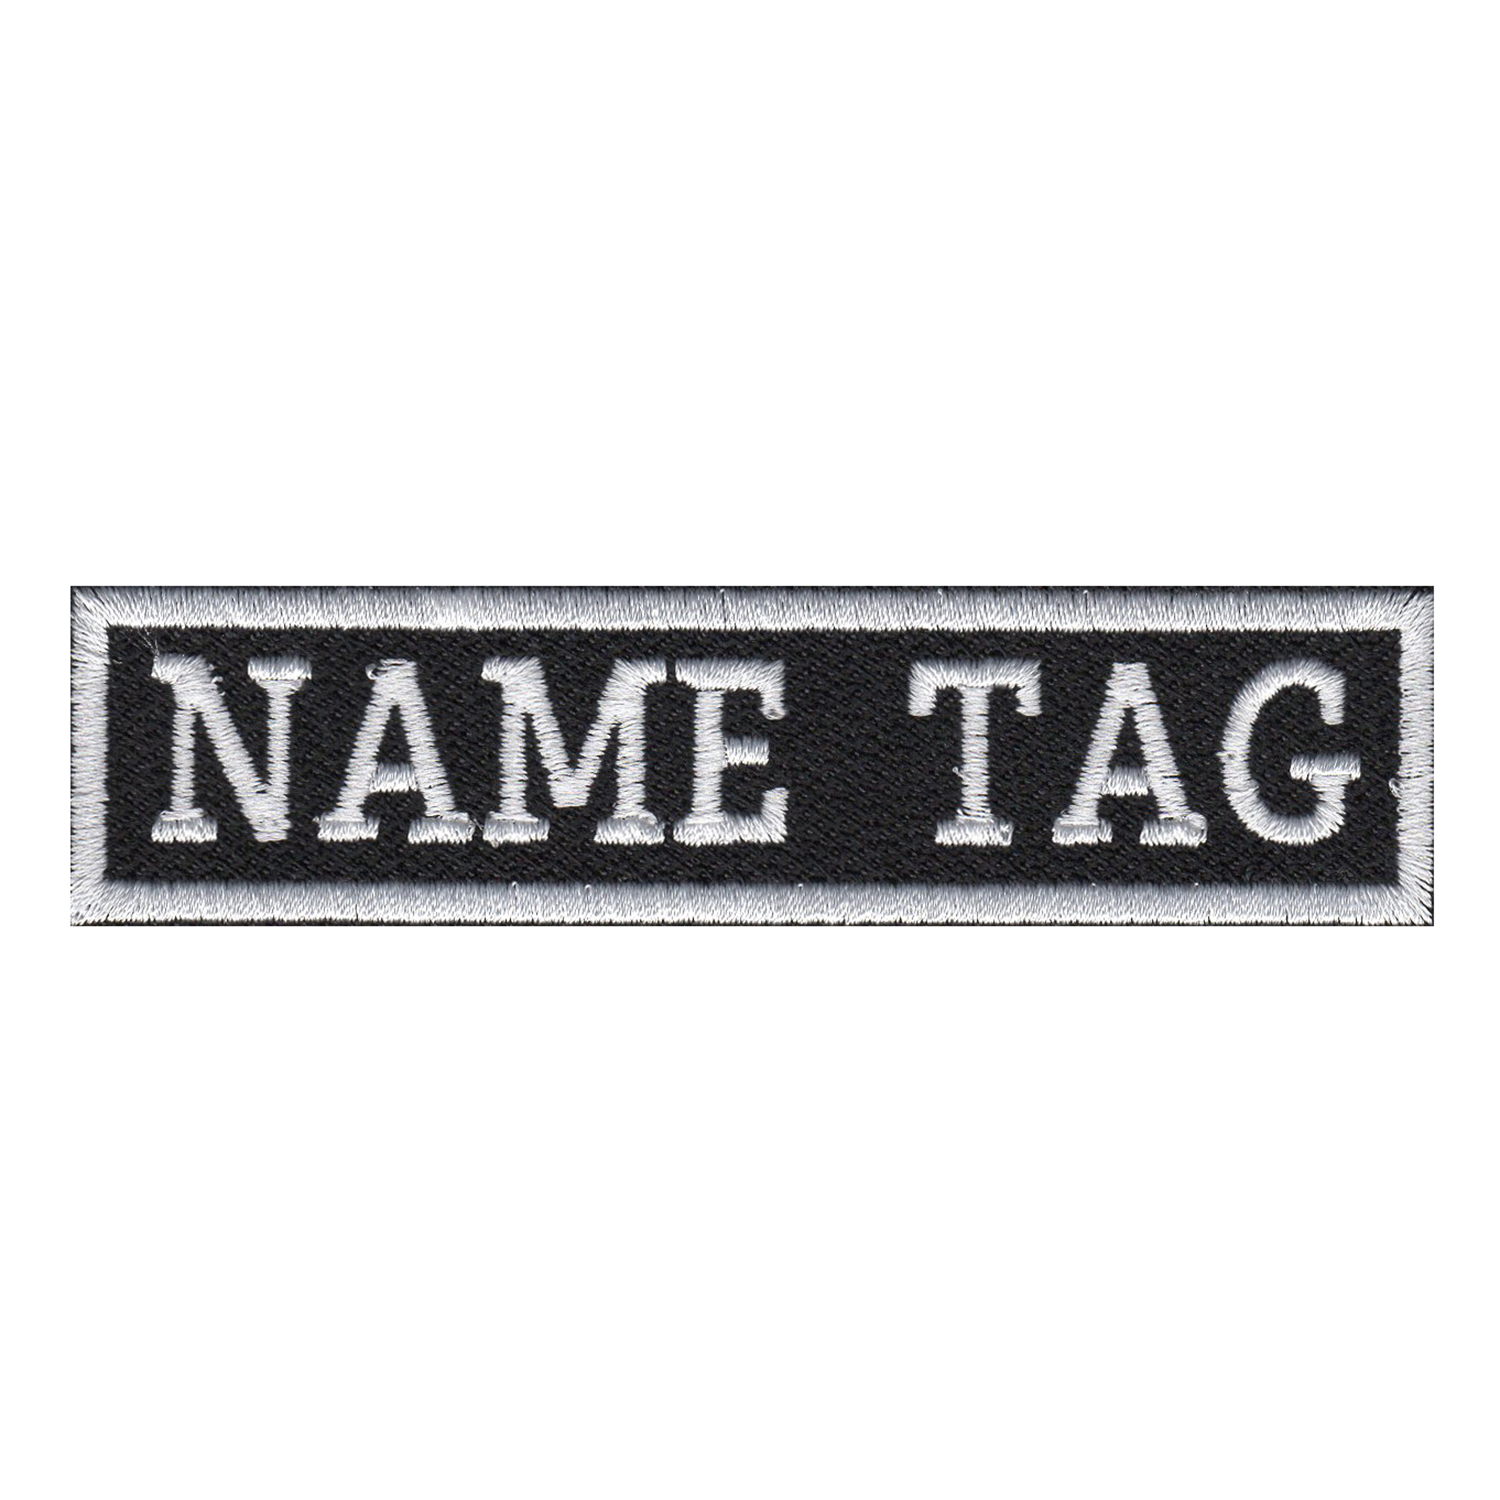 BETTY Name Tag Patch Iron or sew on for Shirt Jacket Vest New BIKER Patches 